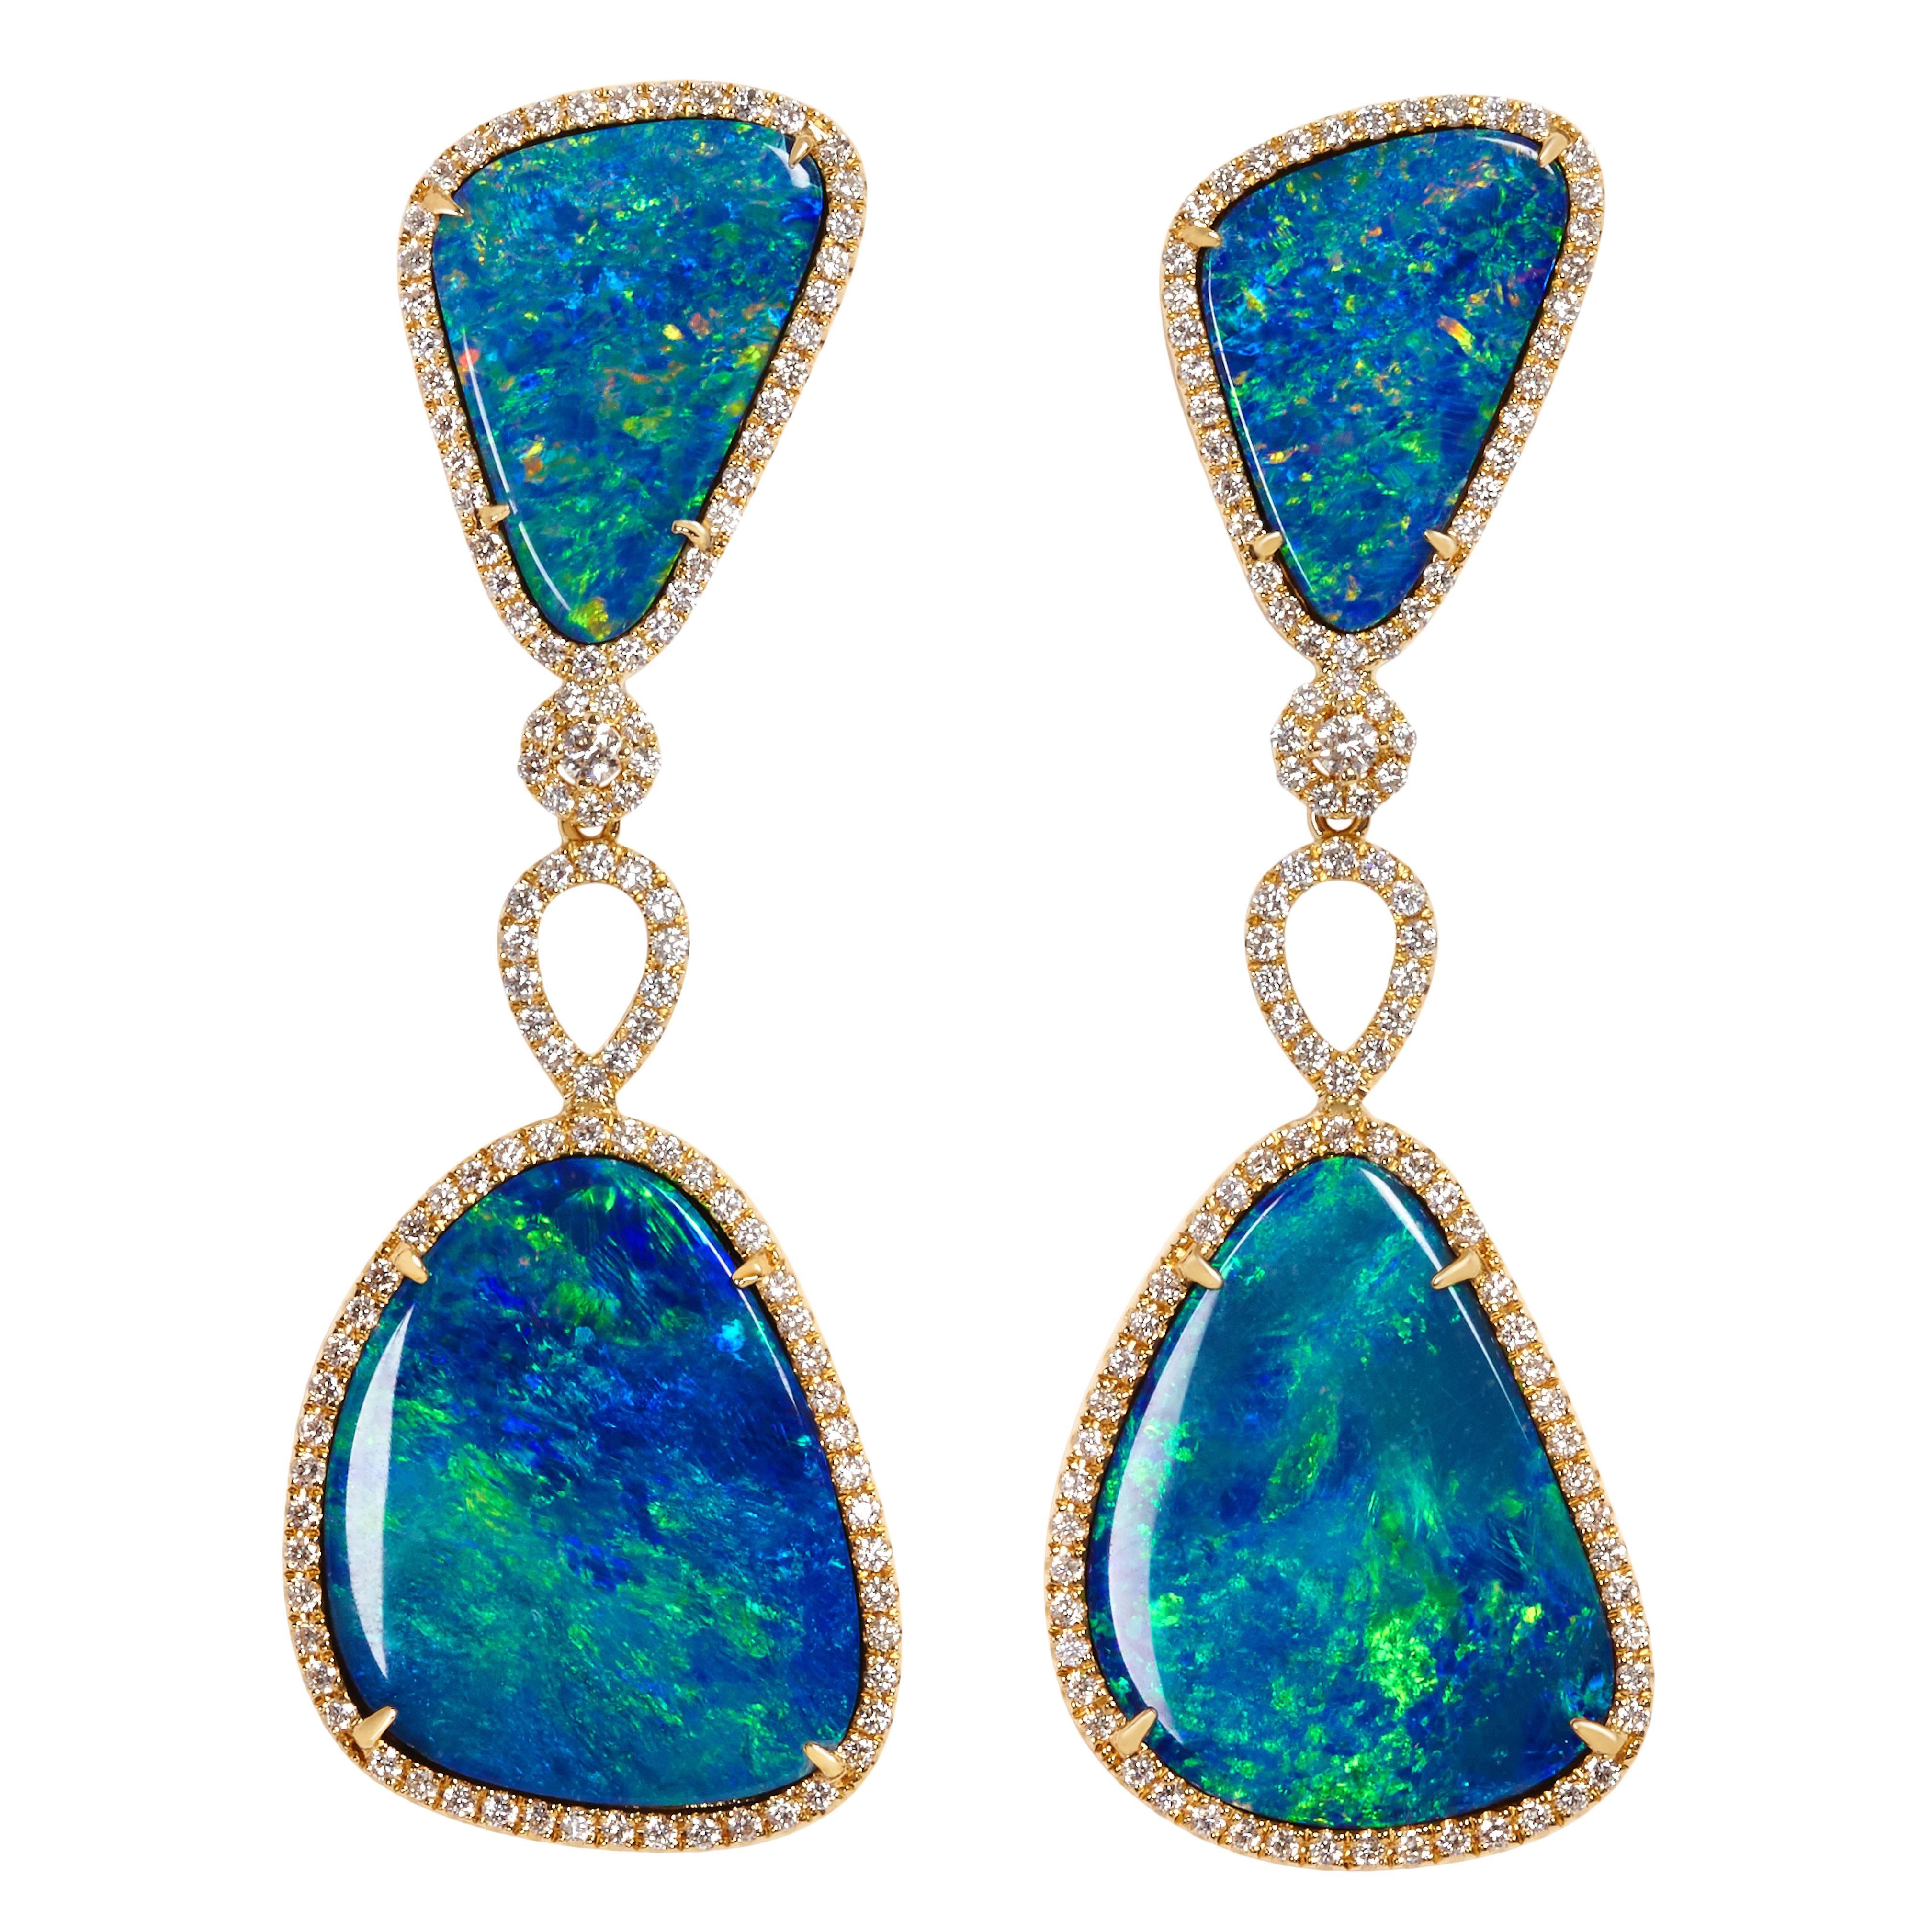 Floating Islands Collection - Opal and diamond detachable earrings For Sale